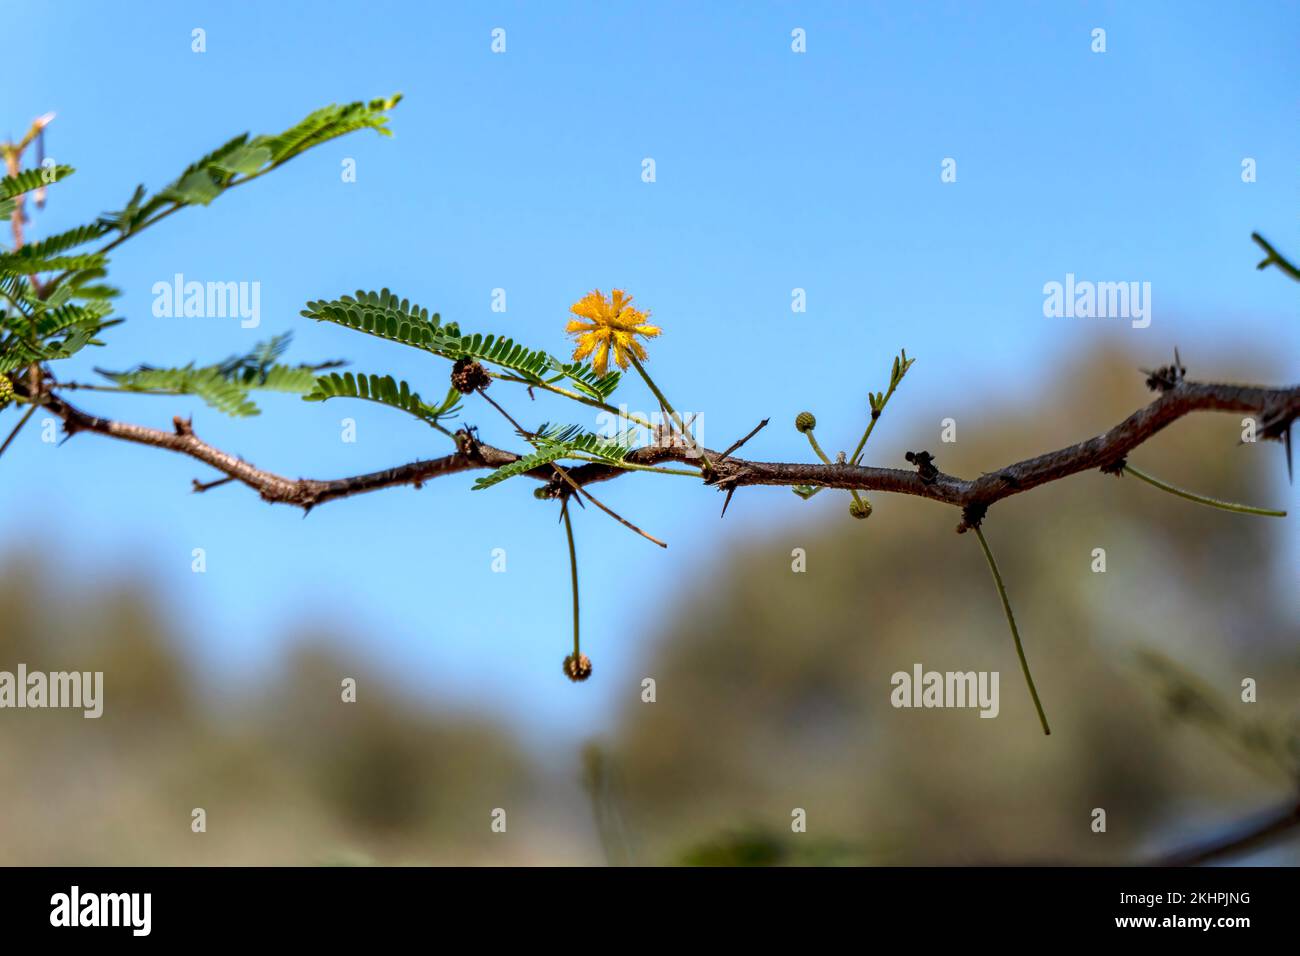 Acacia tree branches with thorns and young green leaves close up Stock Photo